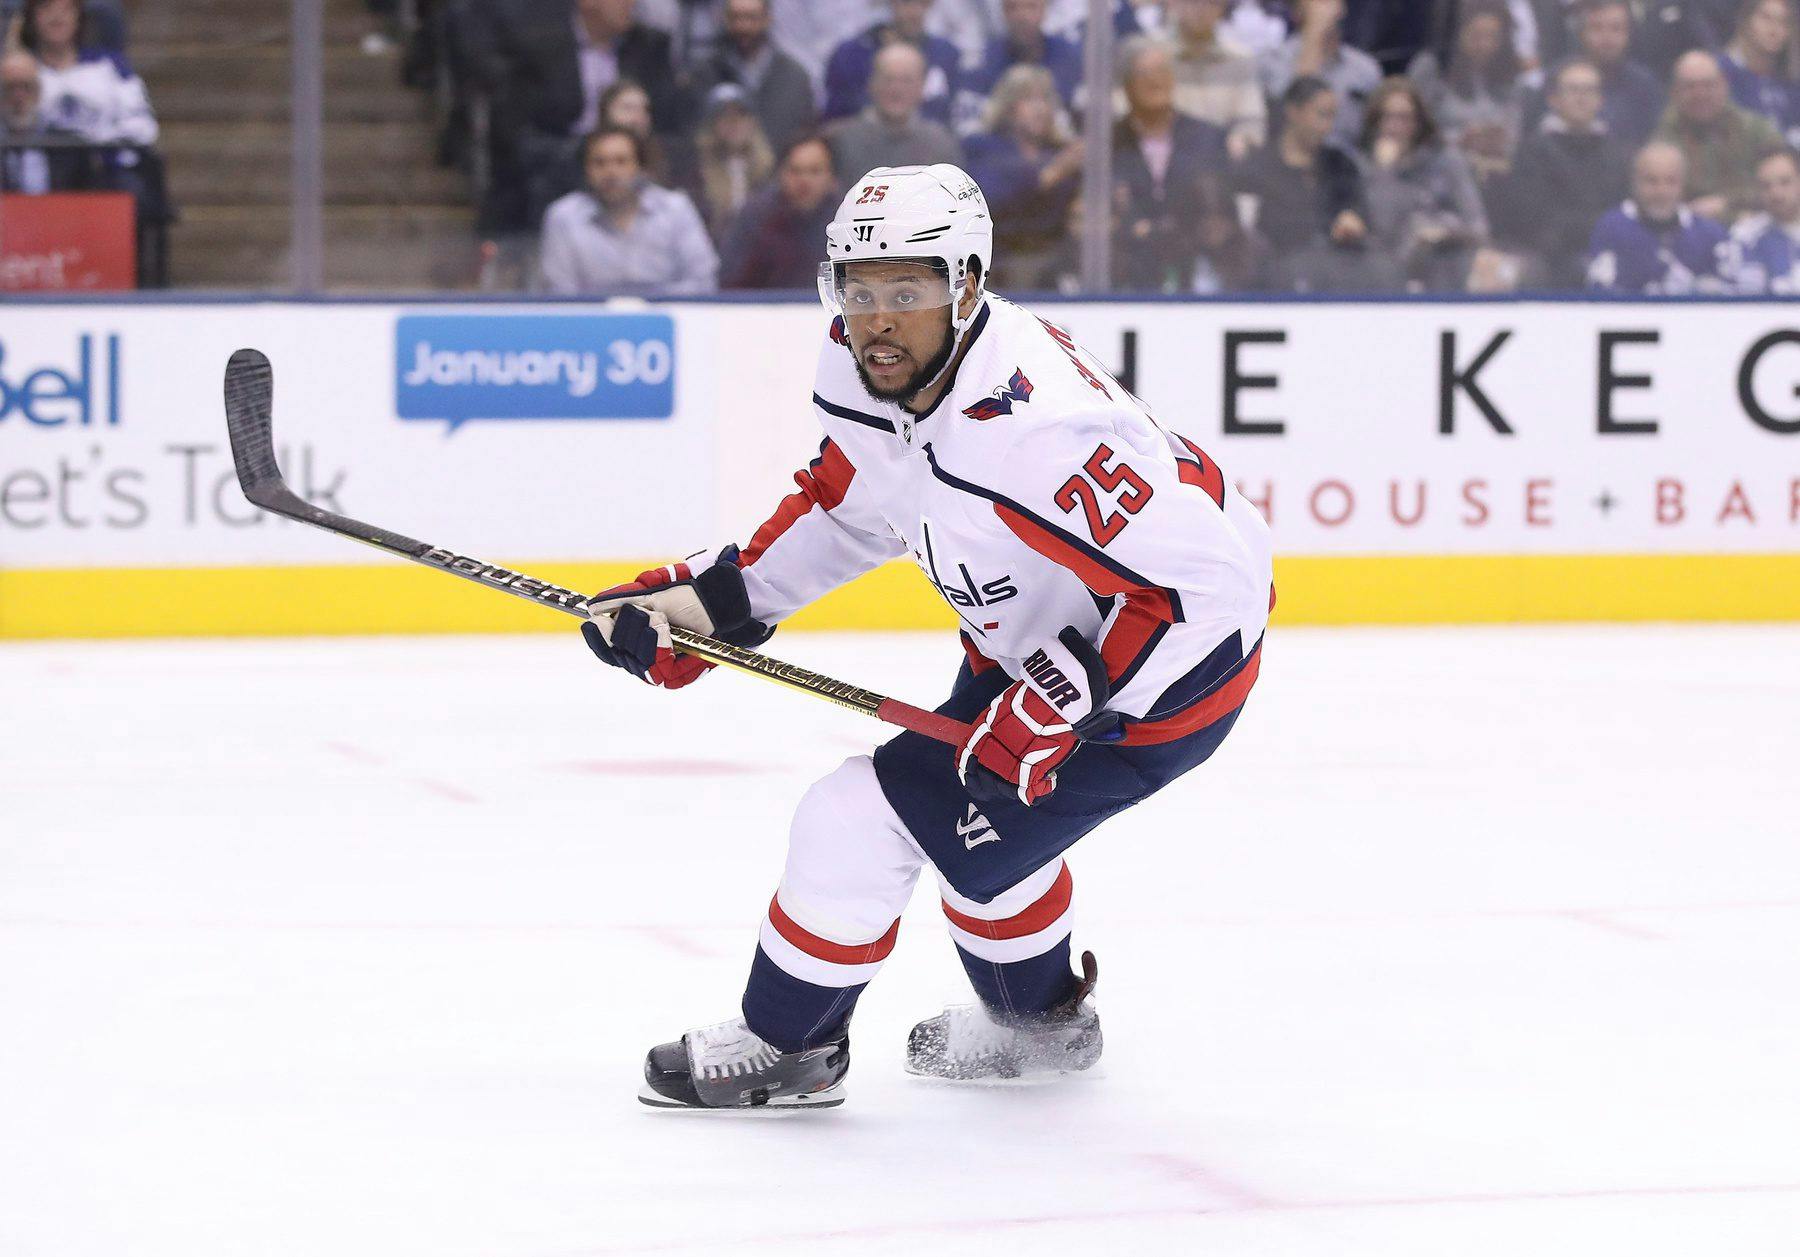 Devante Smith-Pelly announces retirement from hockey after 11 seasons